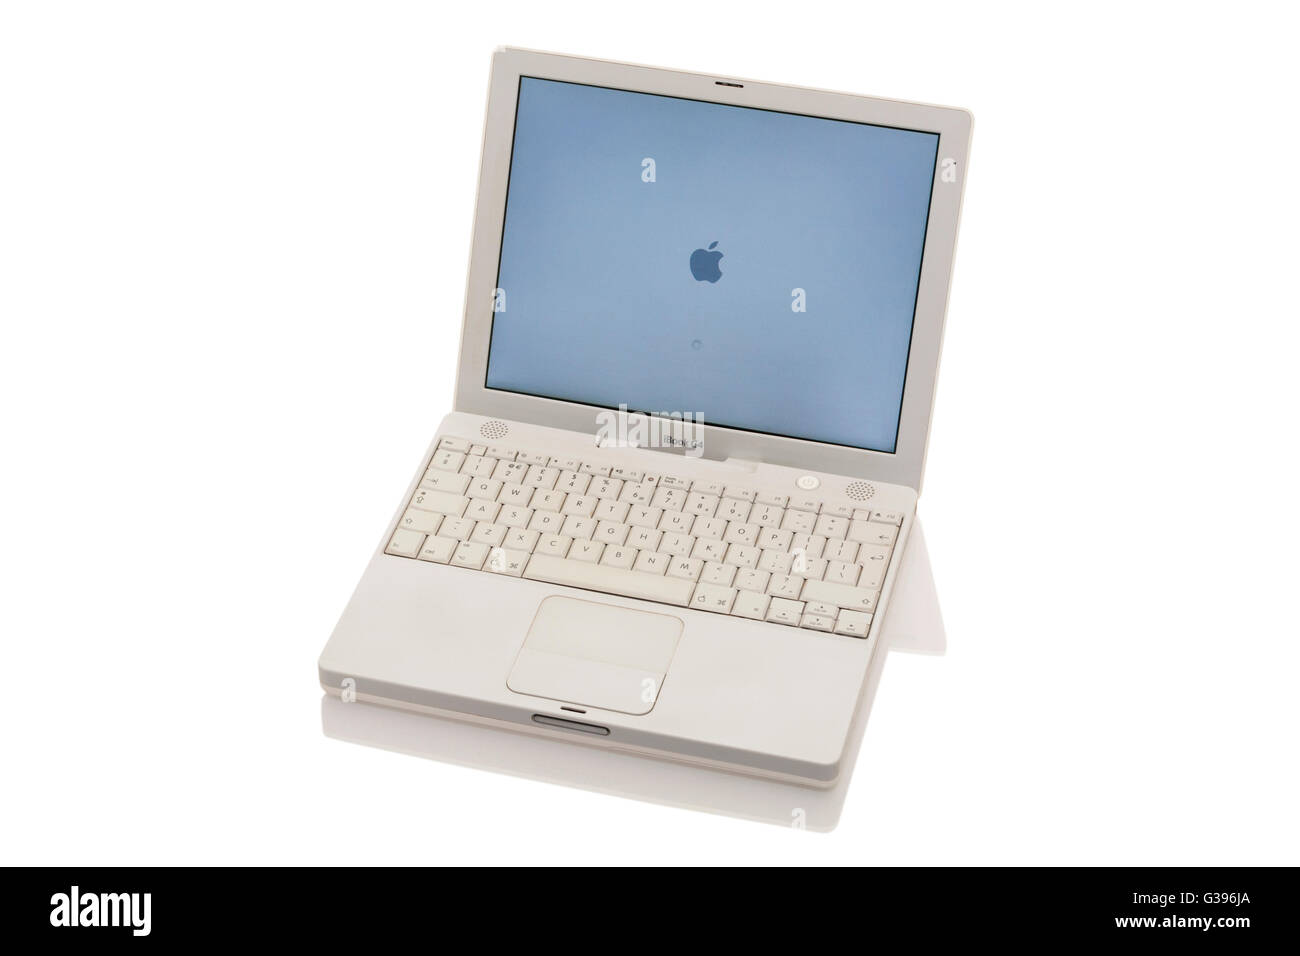 Apple iBook G4 laptop / lap top computer with scrolling TrackPad / trackpad / track pad, start / starting up screen & keyboard. Stock Photo